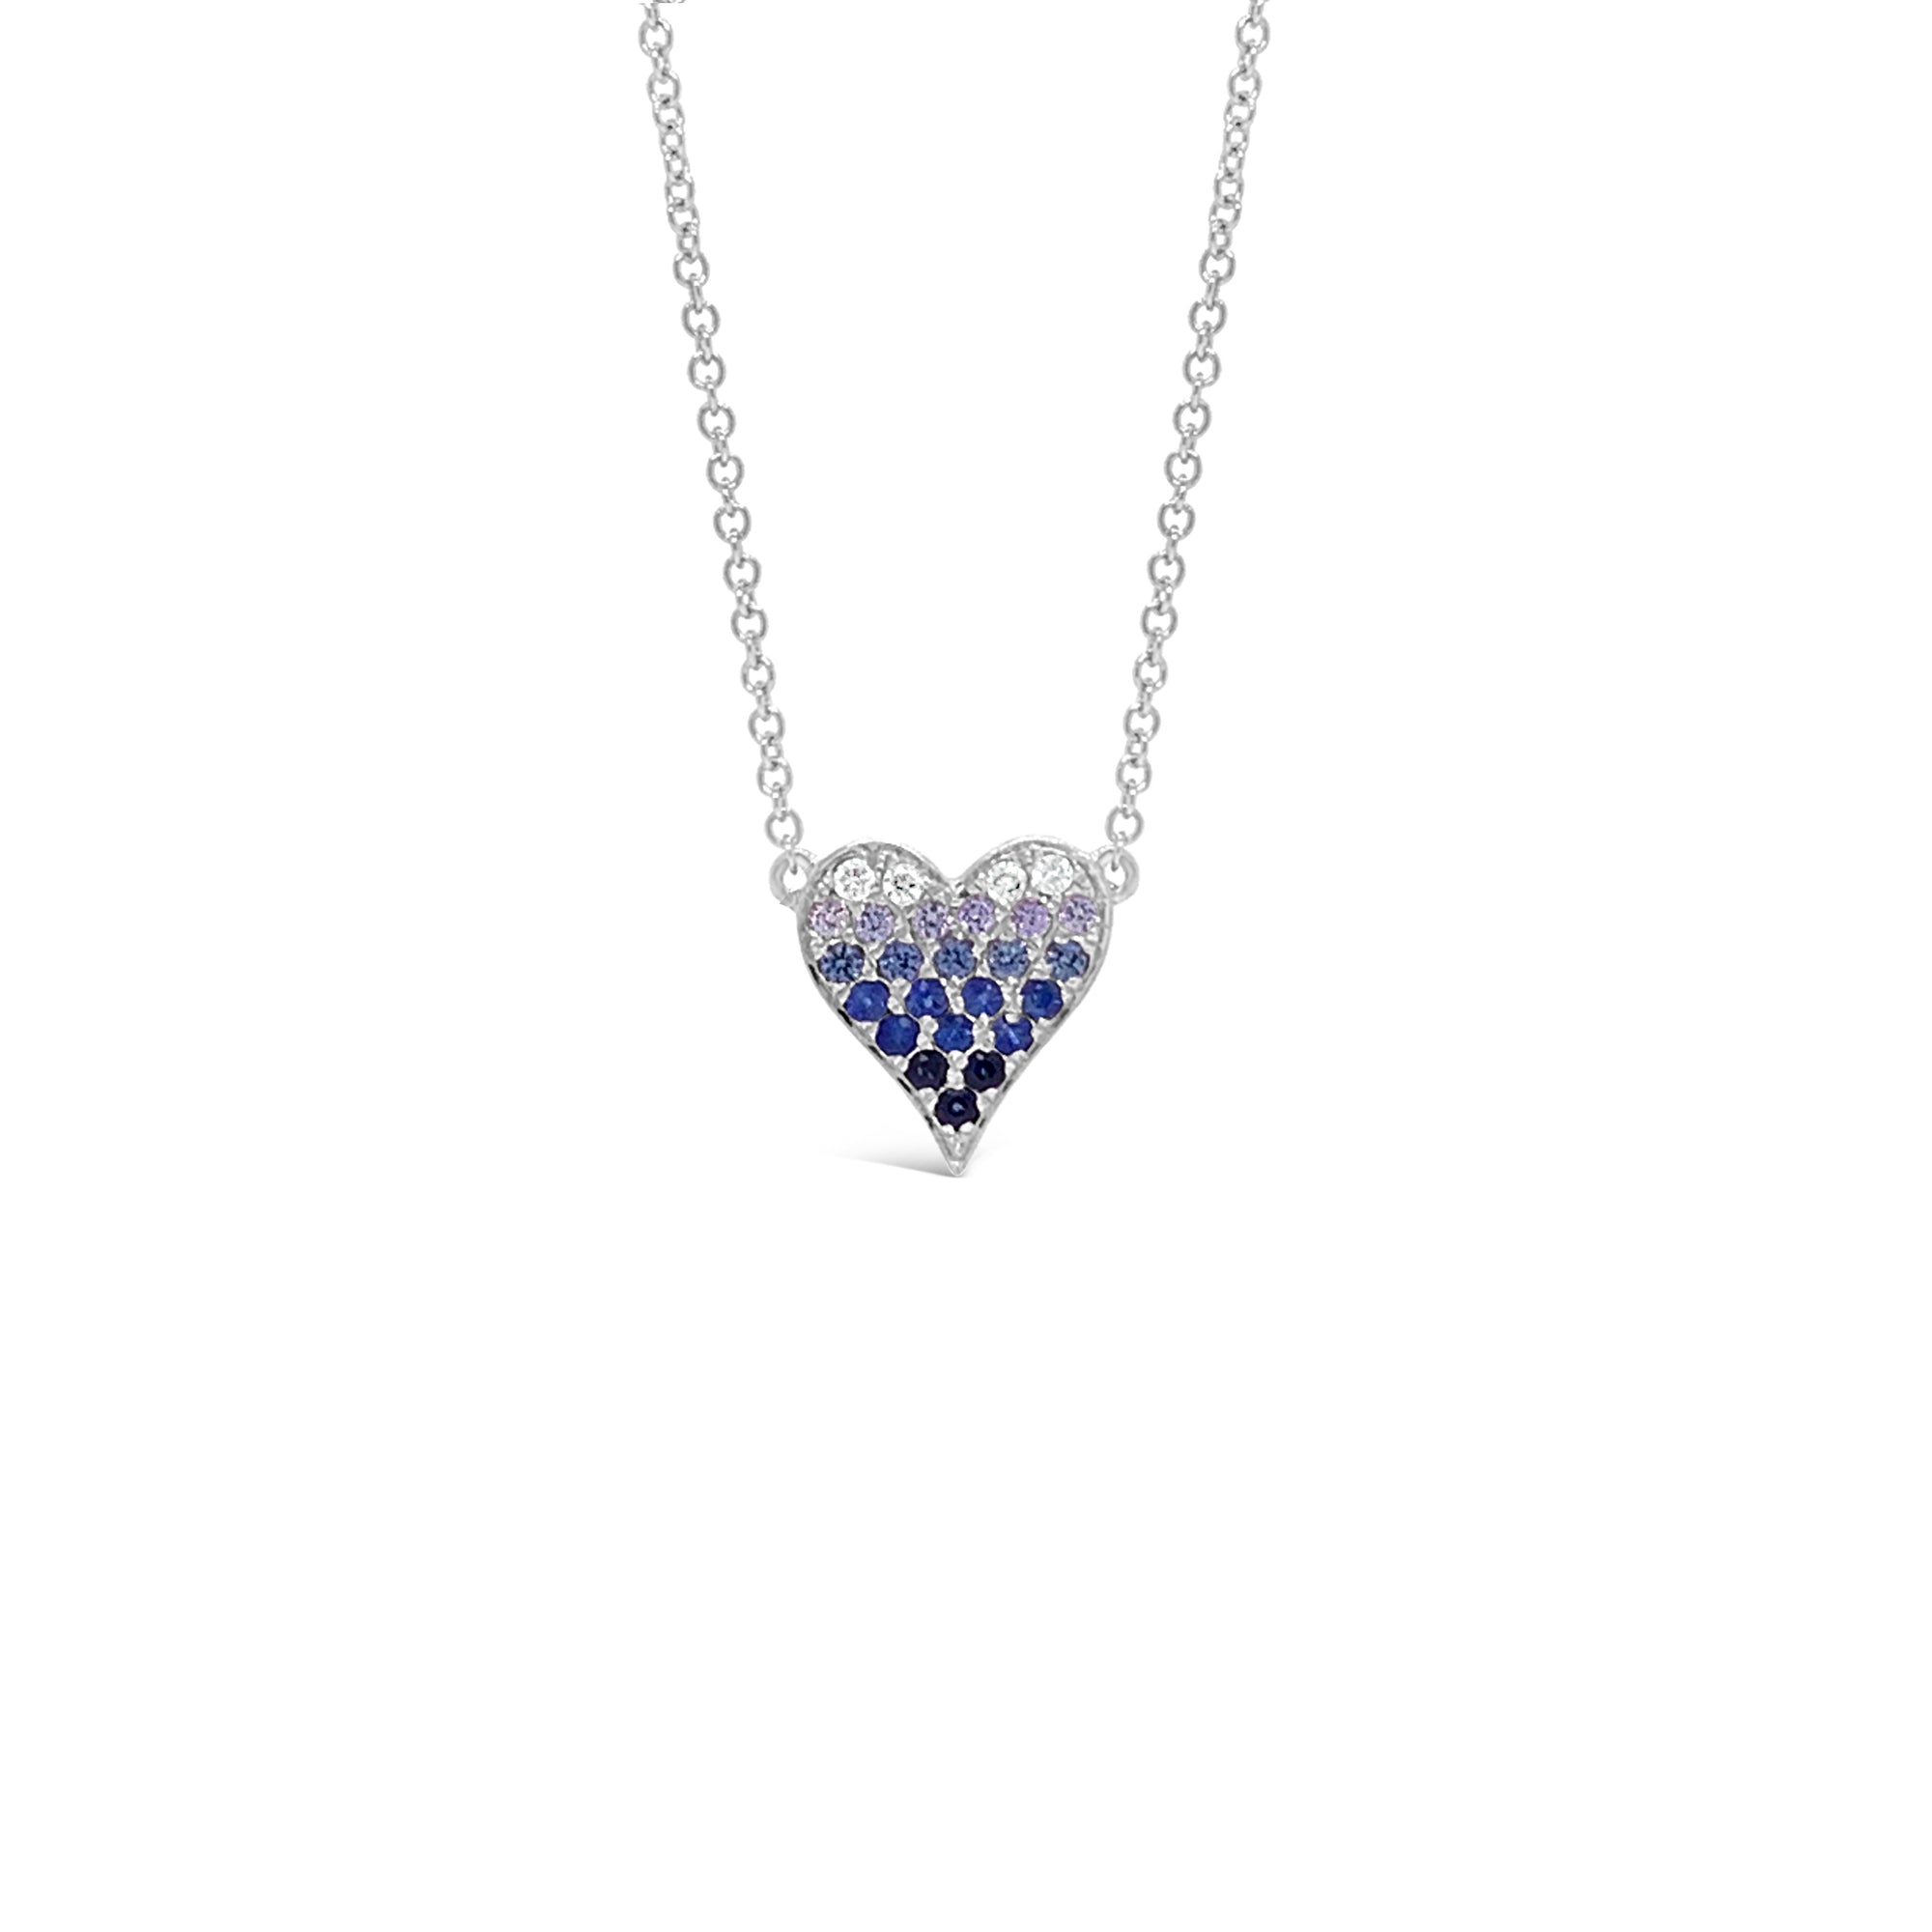 Female Model Wearing Sapphire Gradient Mini Pink Diamond Heart Pendant Necklace  -14K gold weighing 1.98 grams  -4 round diamonds totaling 0.05 carats  -21 sapphires totaling 0.24 carats